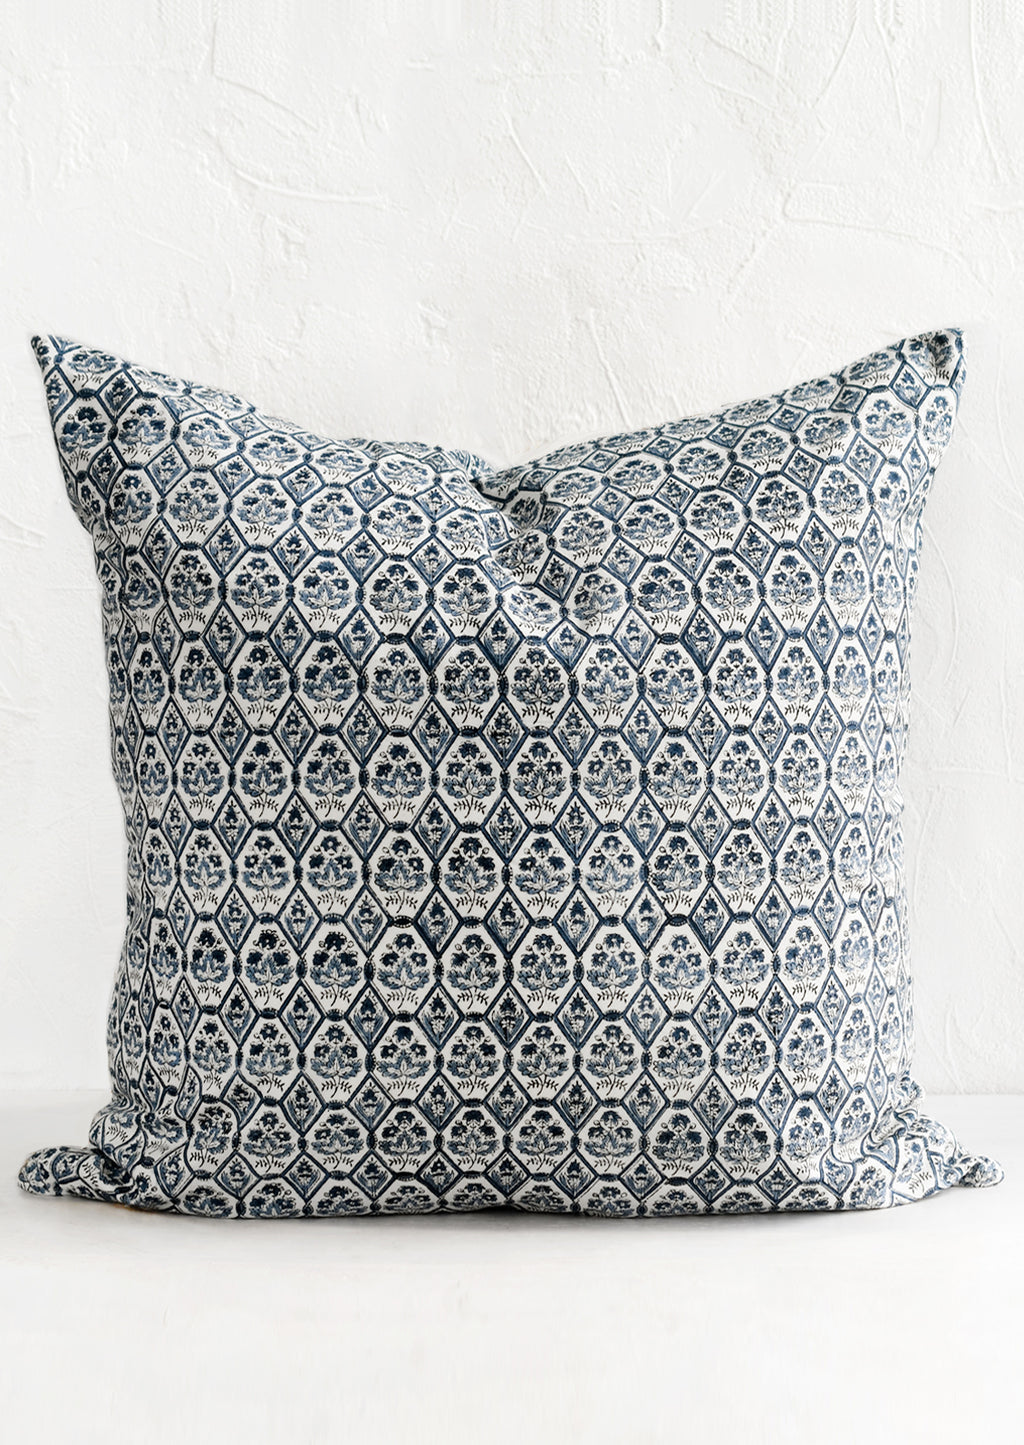 1: A block printed pillow in blue and white tile print.